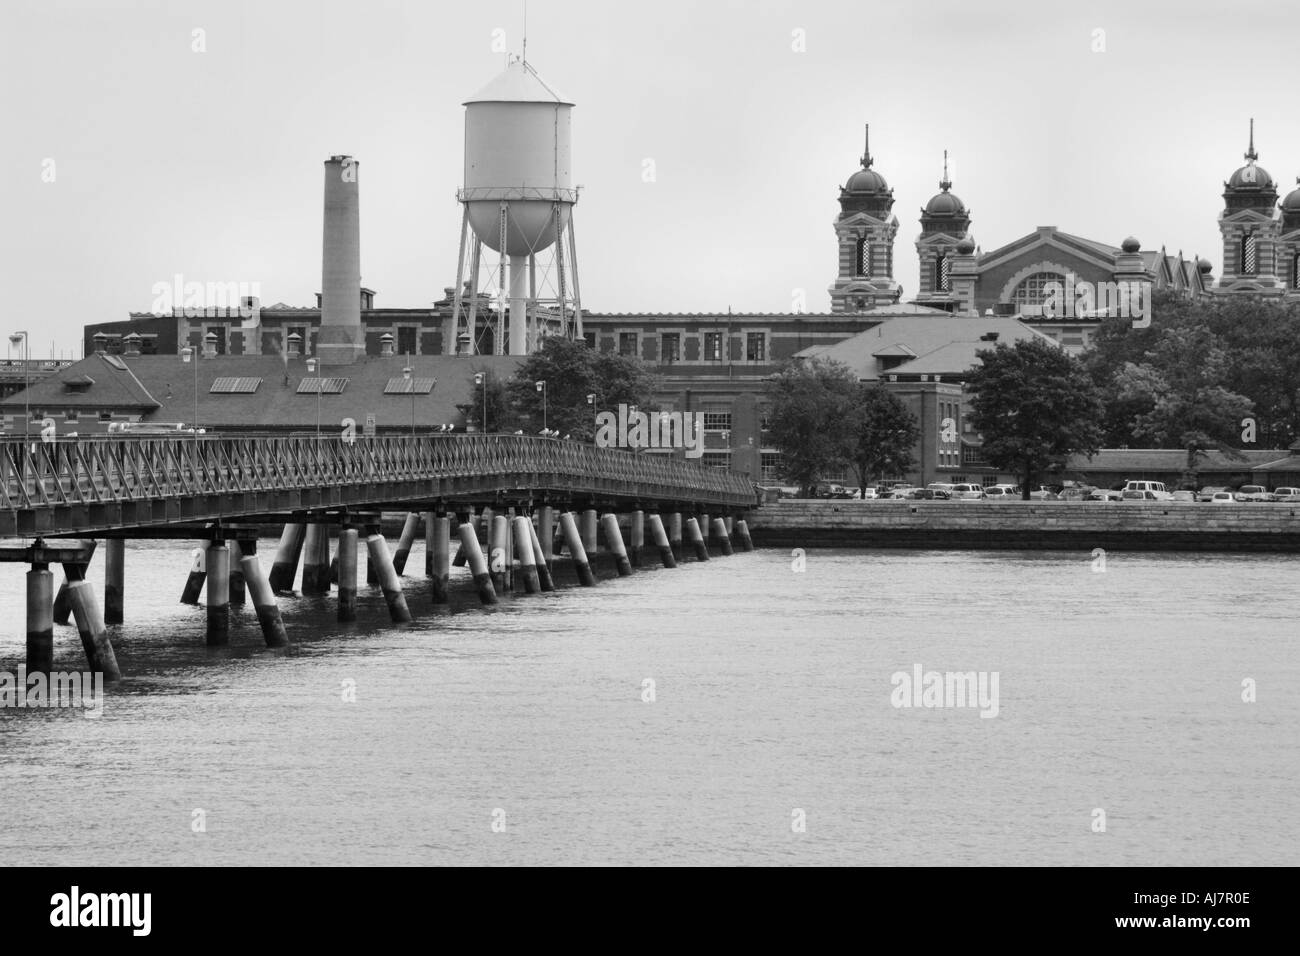 Ellis island and bridge connecting it to Liberty State Park in New Jersey Black and White Stock Photo